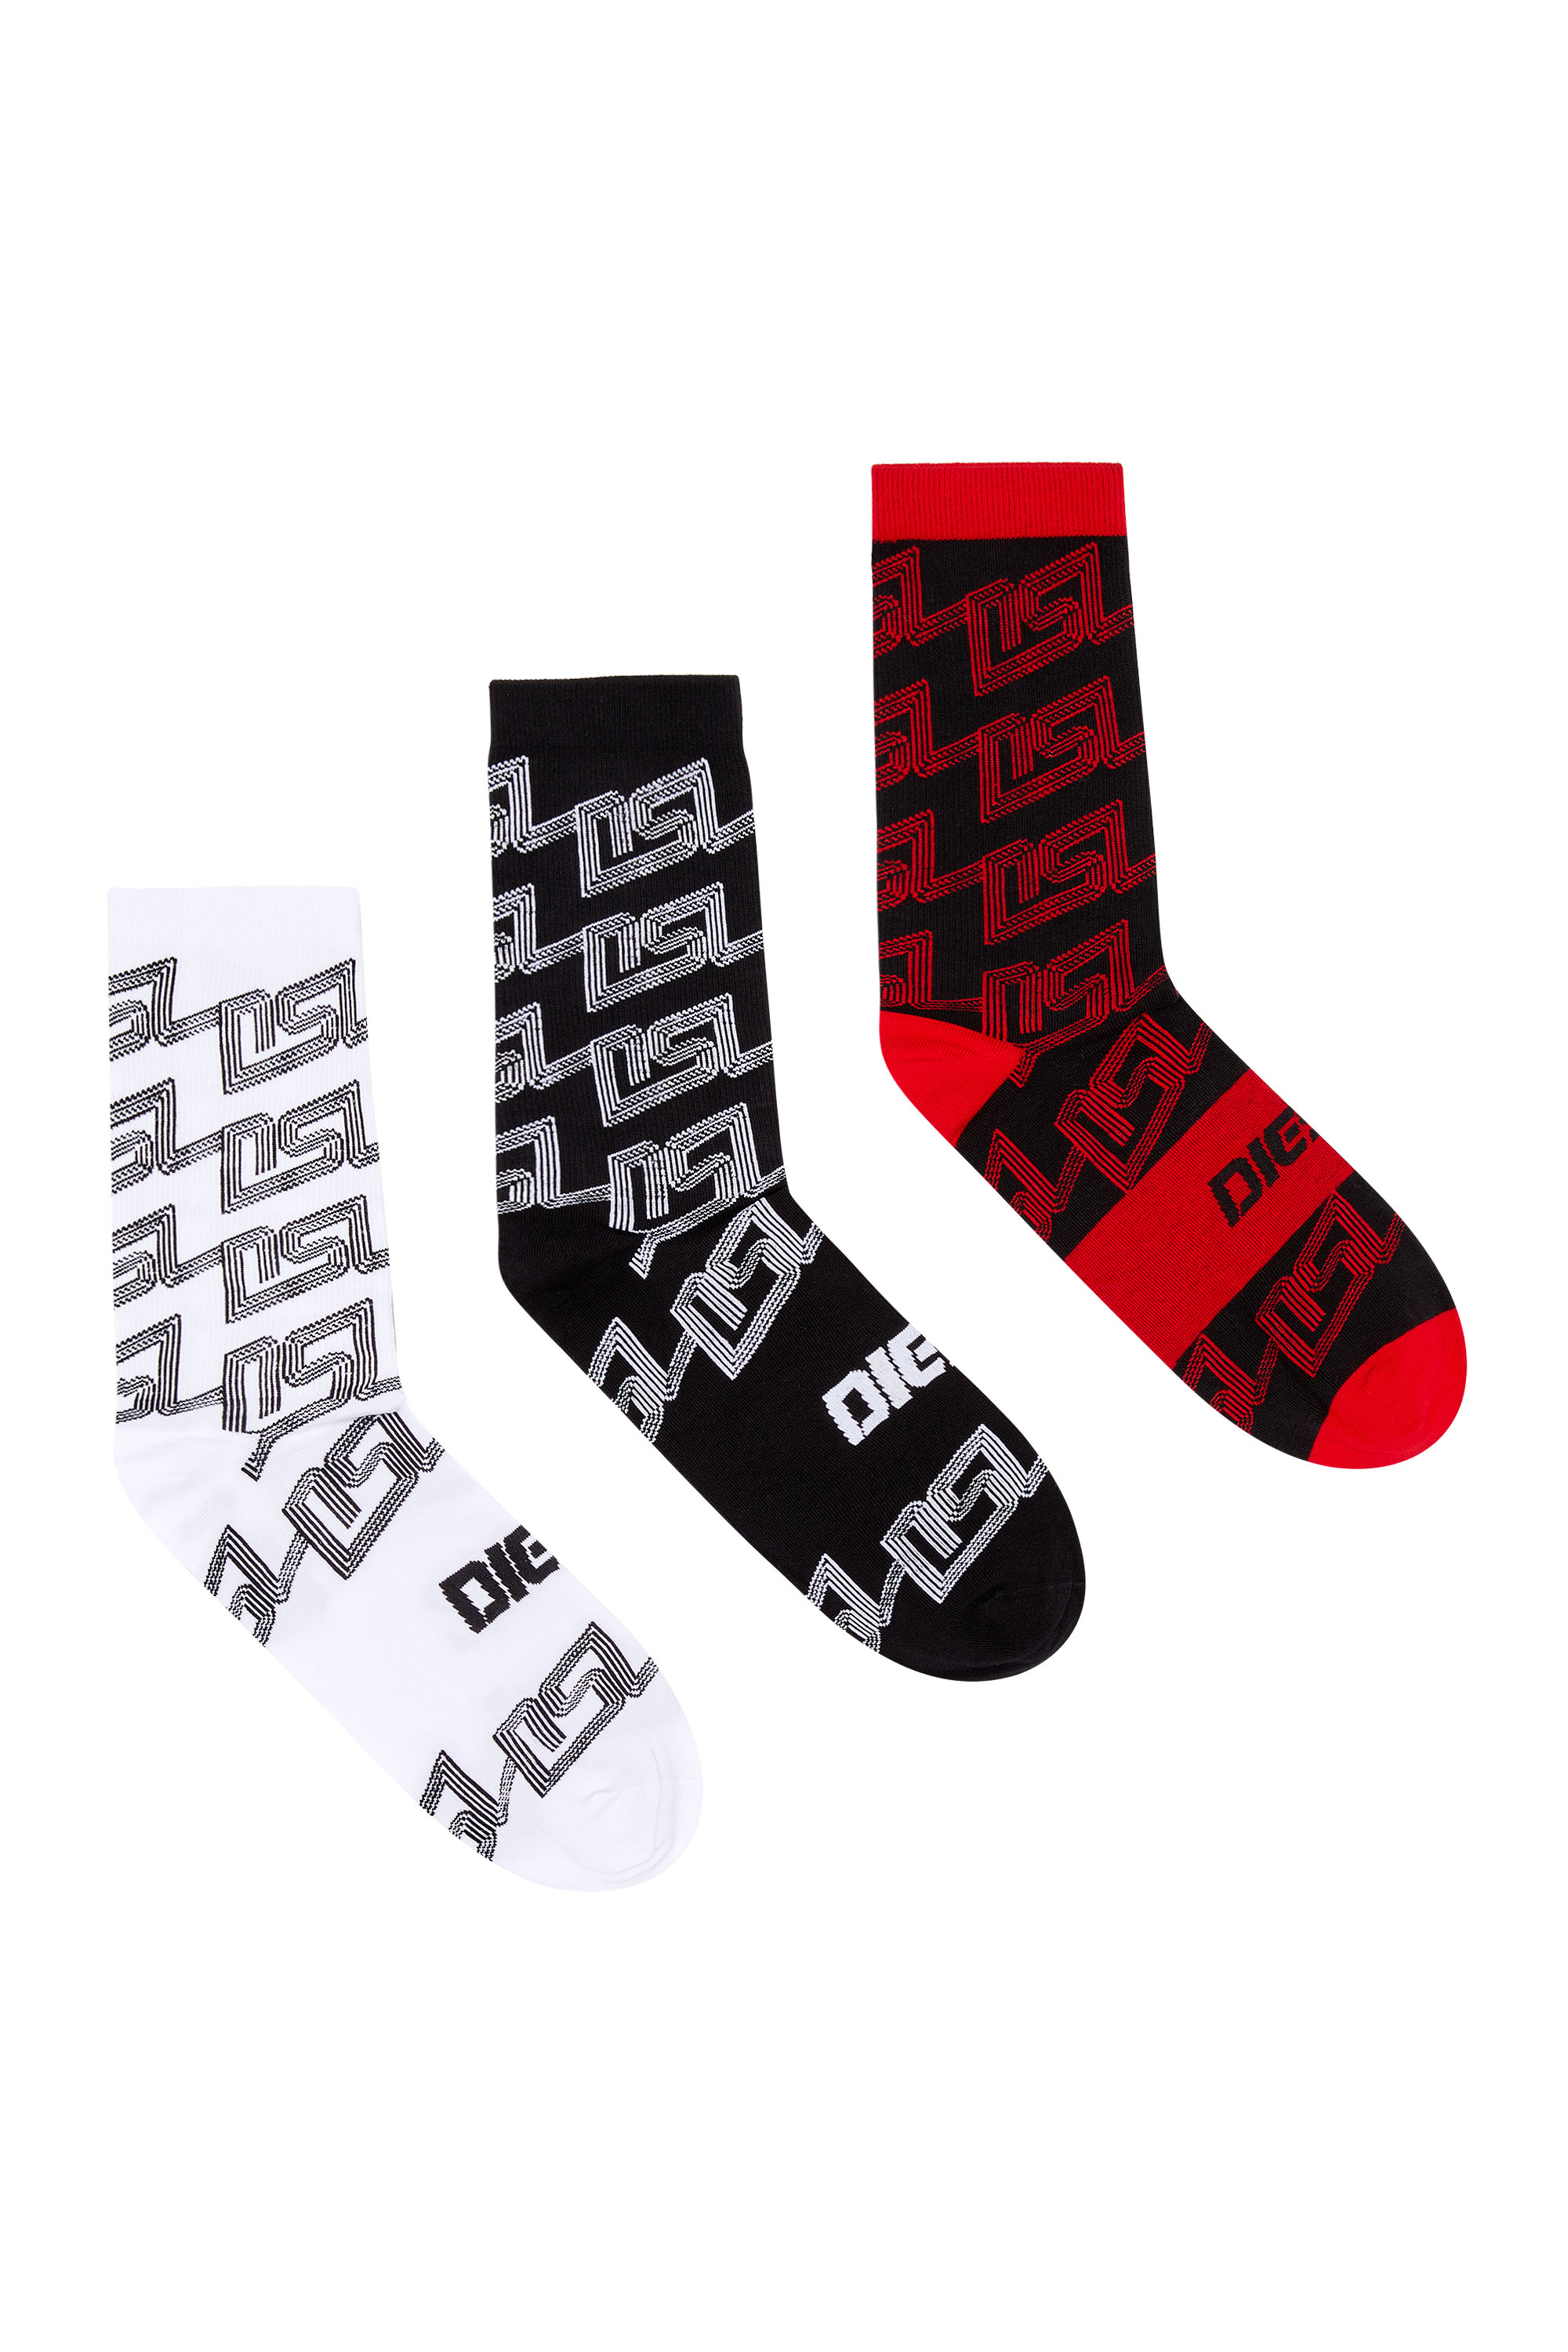 Three-pack of socks with all-over DSL logo